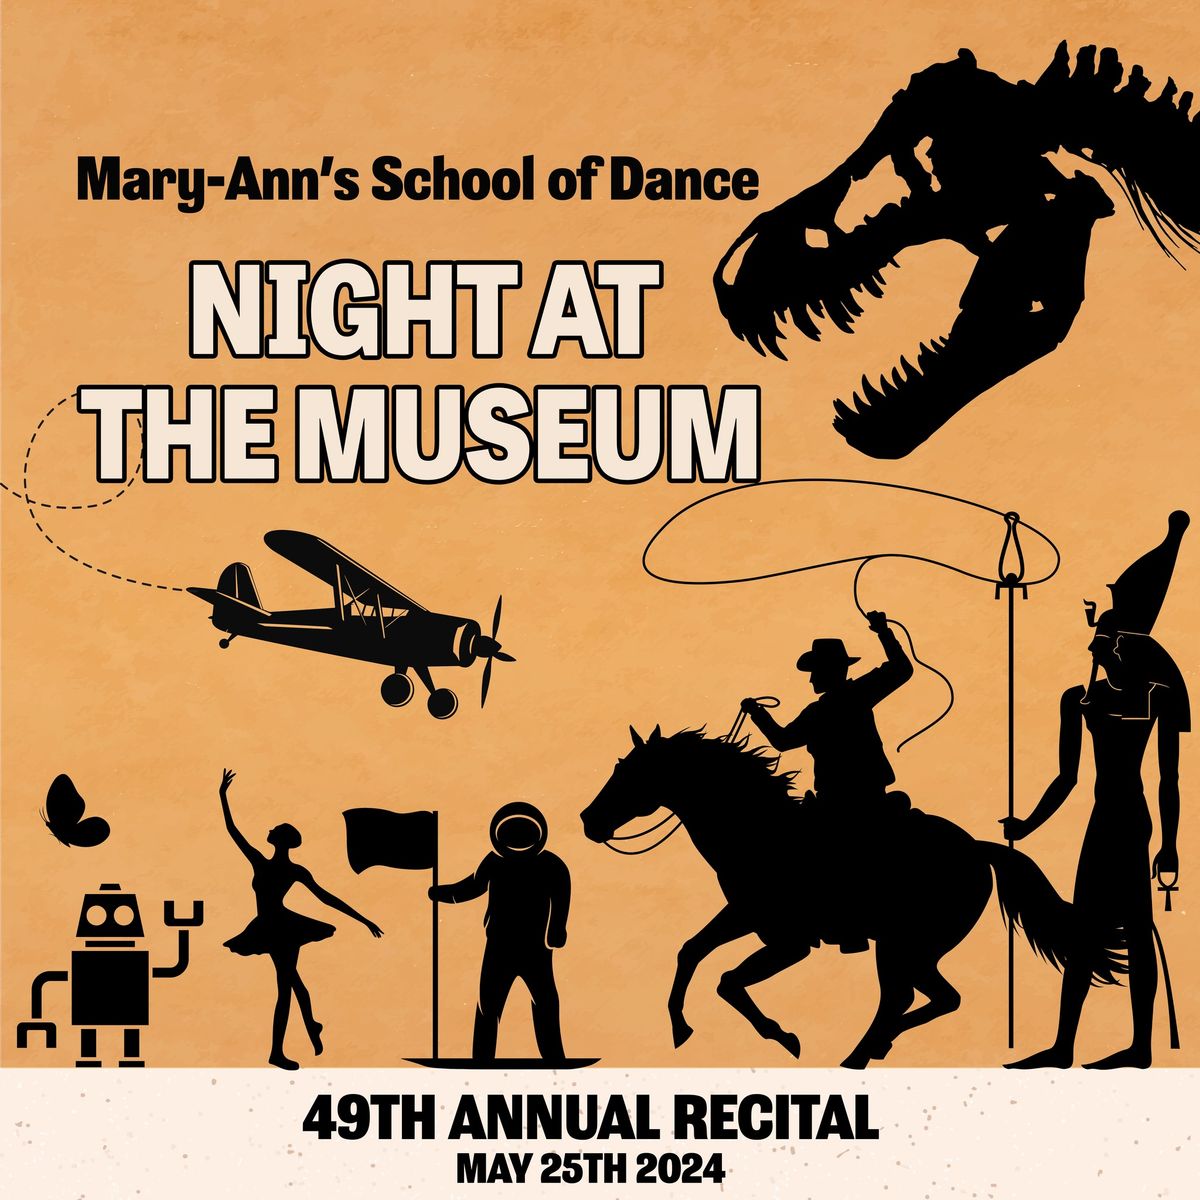 Night at The Museum - Mary-Ann's School of Dance 49th Annual Recital 